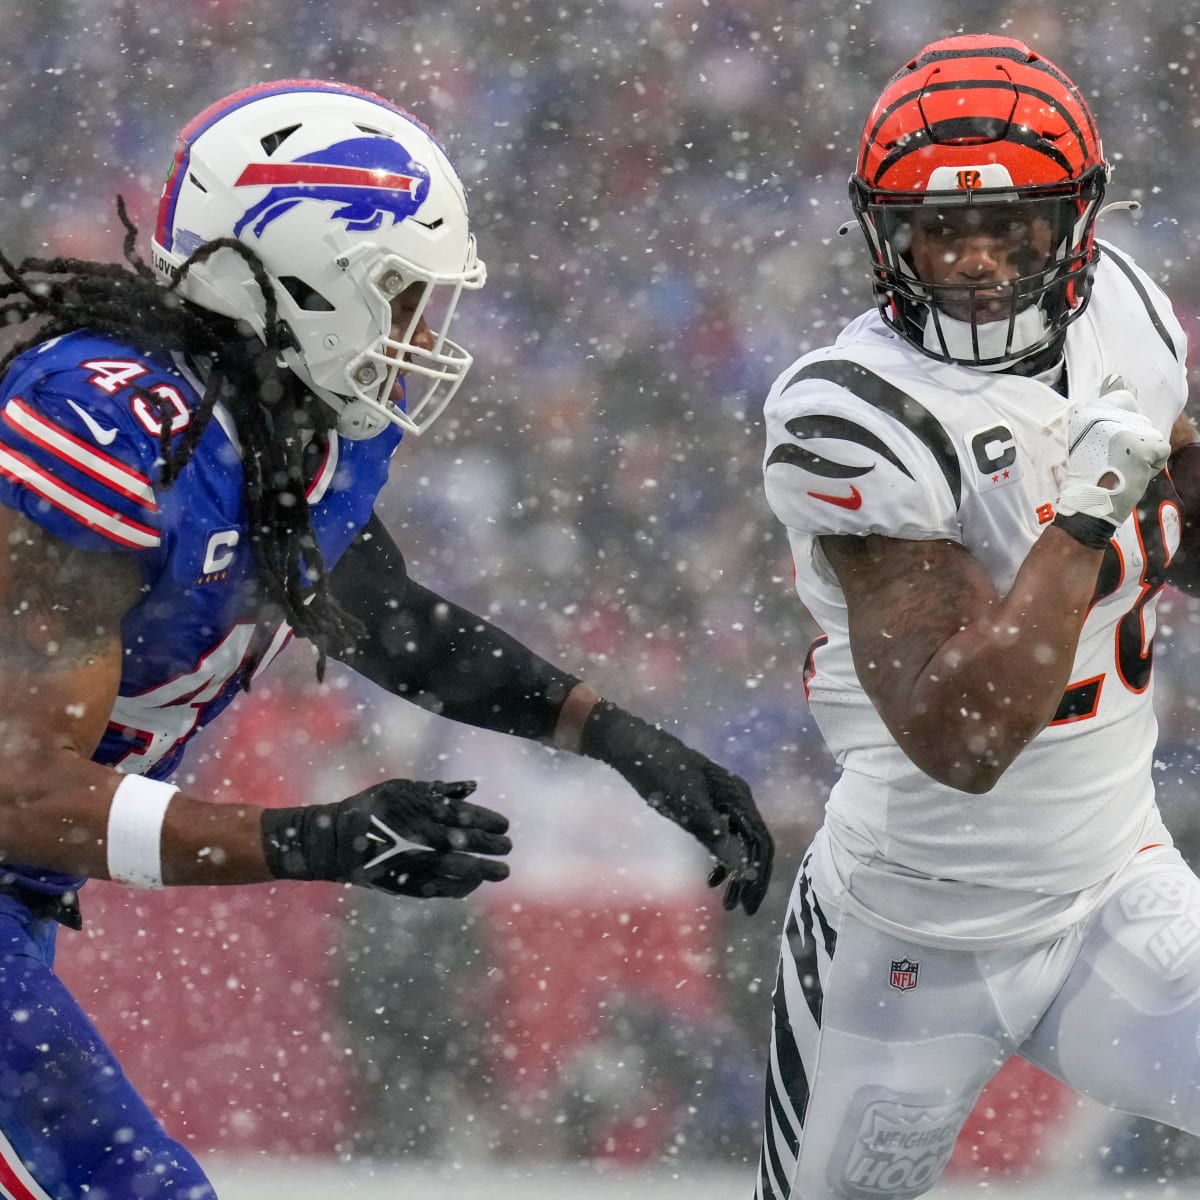 Bills season concludes with 27-10 loss to the Bengals